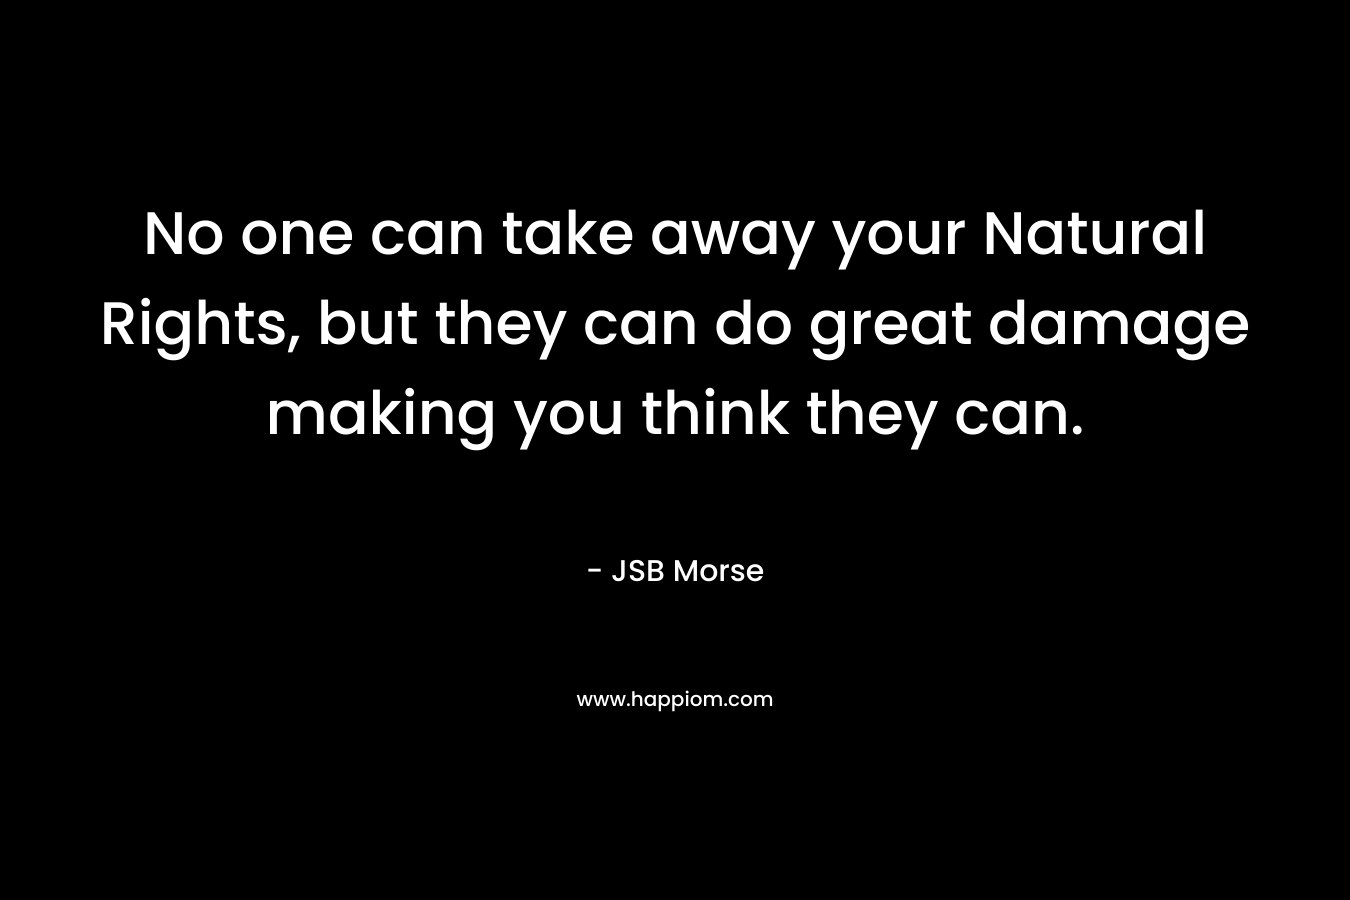 No one can take away your Natural Rights, but they can do great damage making you think they can.